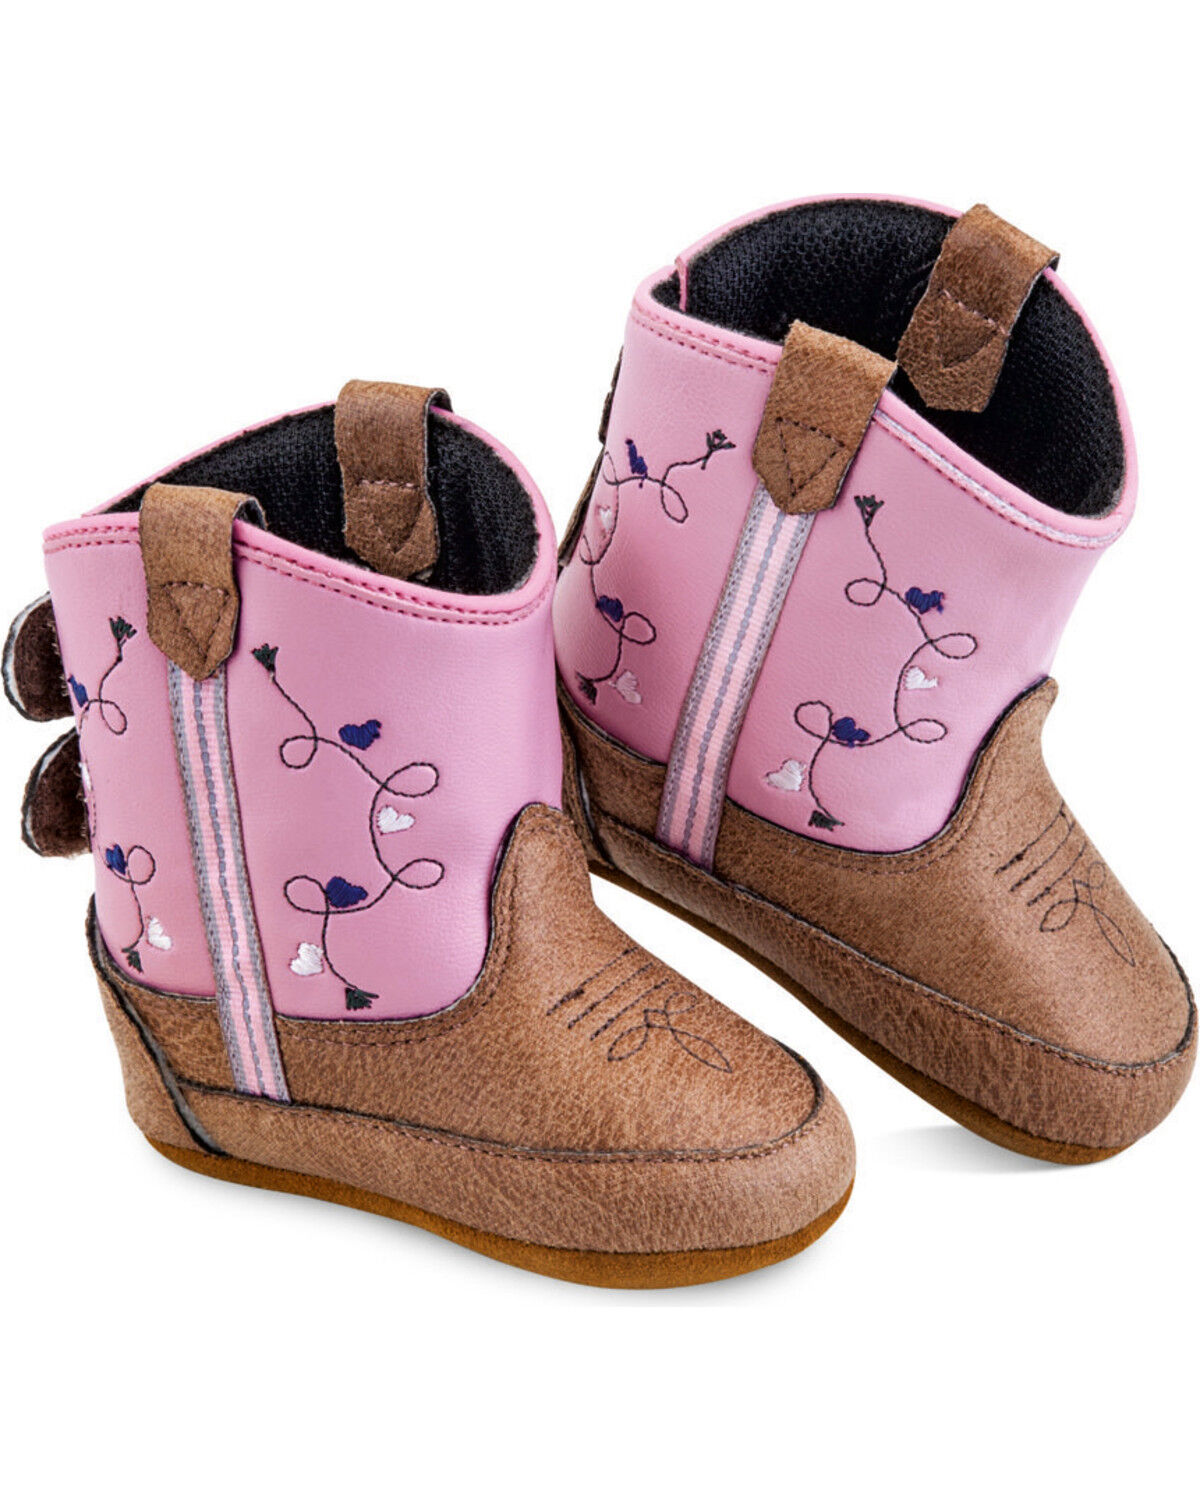 Western Infant Baby Girl Pink Cowboy Cowgirl Boots Faux Suede Gift Boxed 